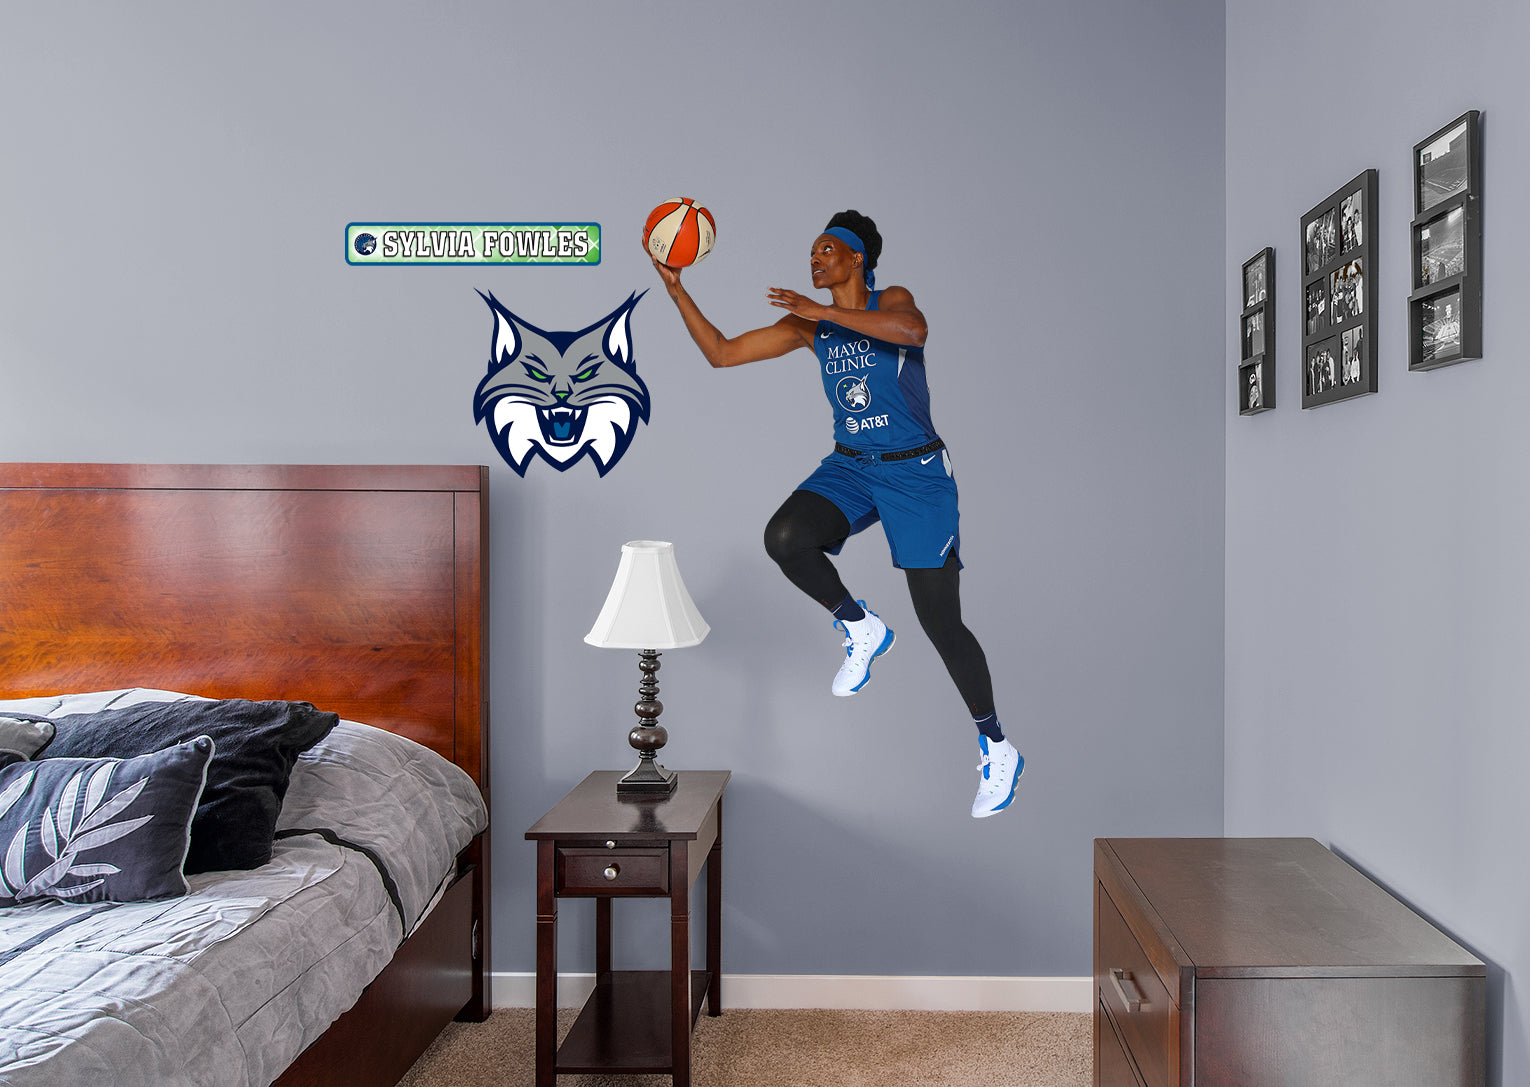 Sylvia Fowles 2020 RealBig for Minnesota Lynx - Officially Licensed WNBA Removable Wall Decal Giant Athlete + 2 Decals (31"W x 5